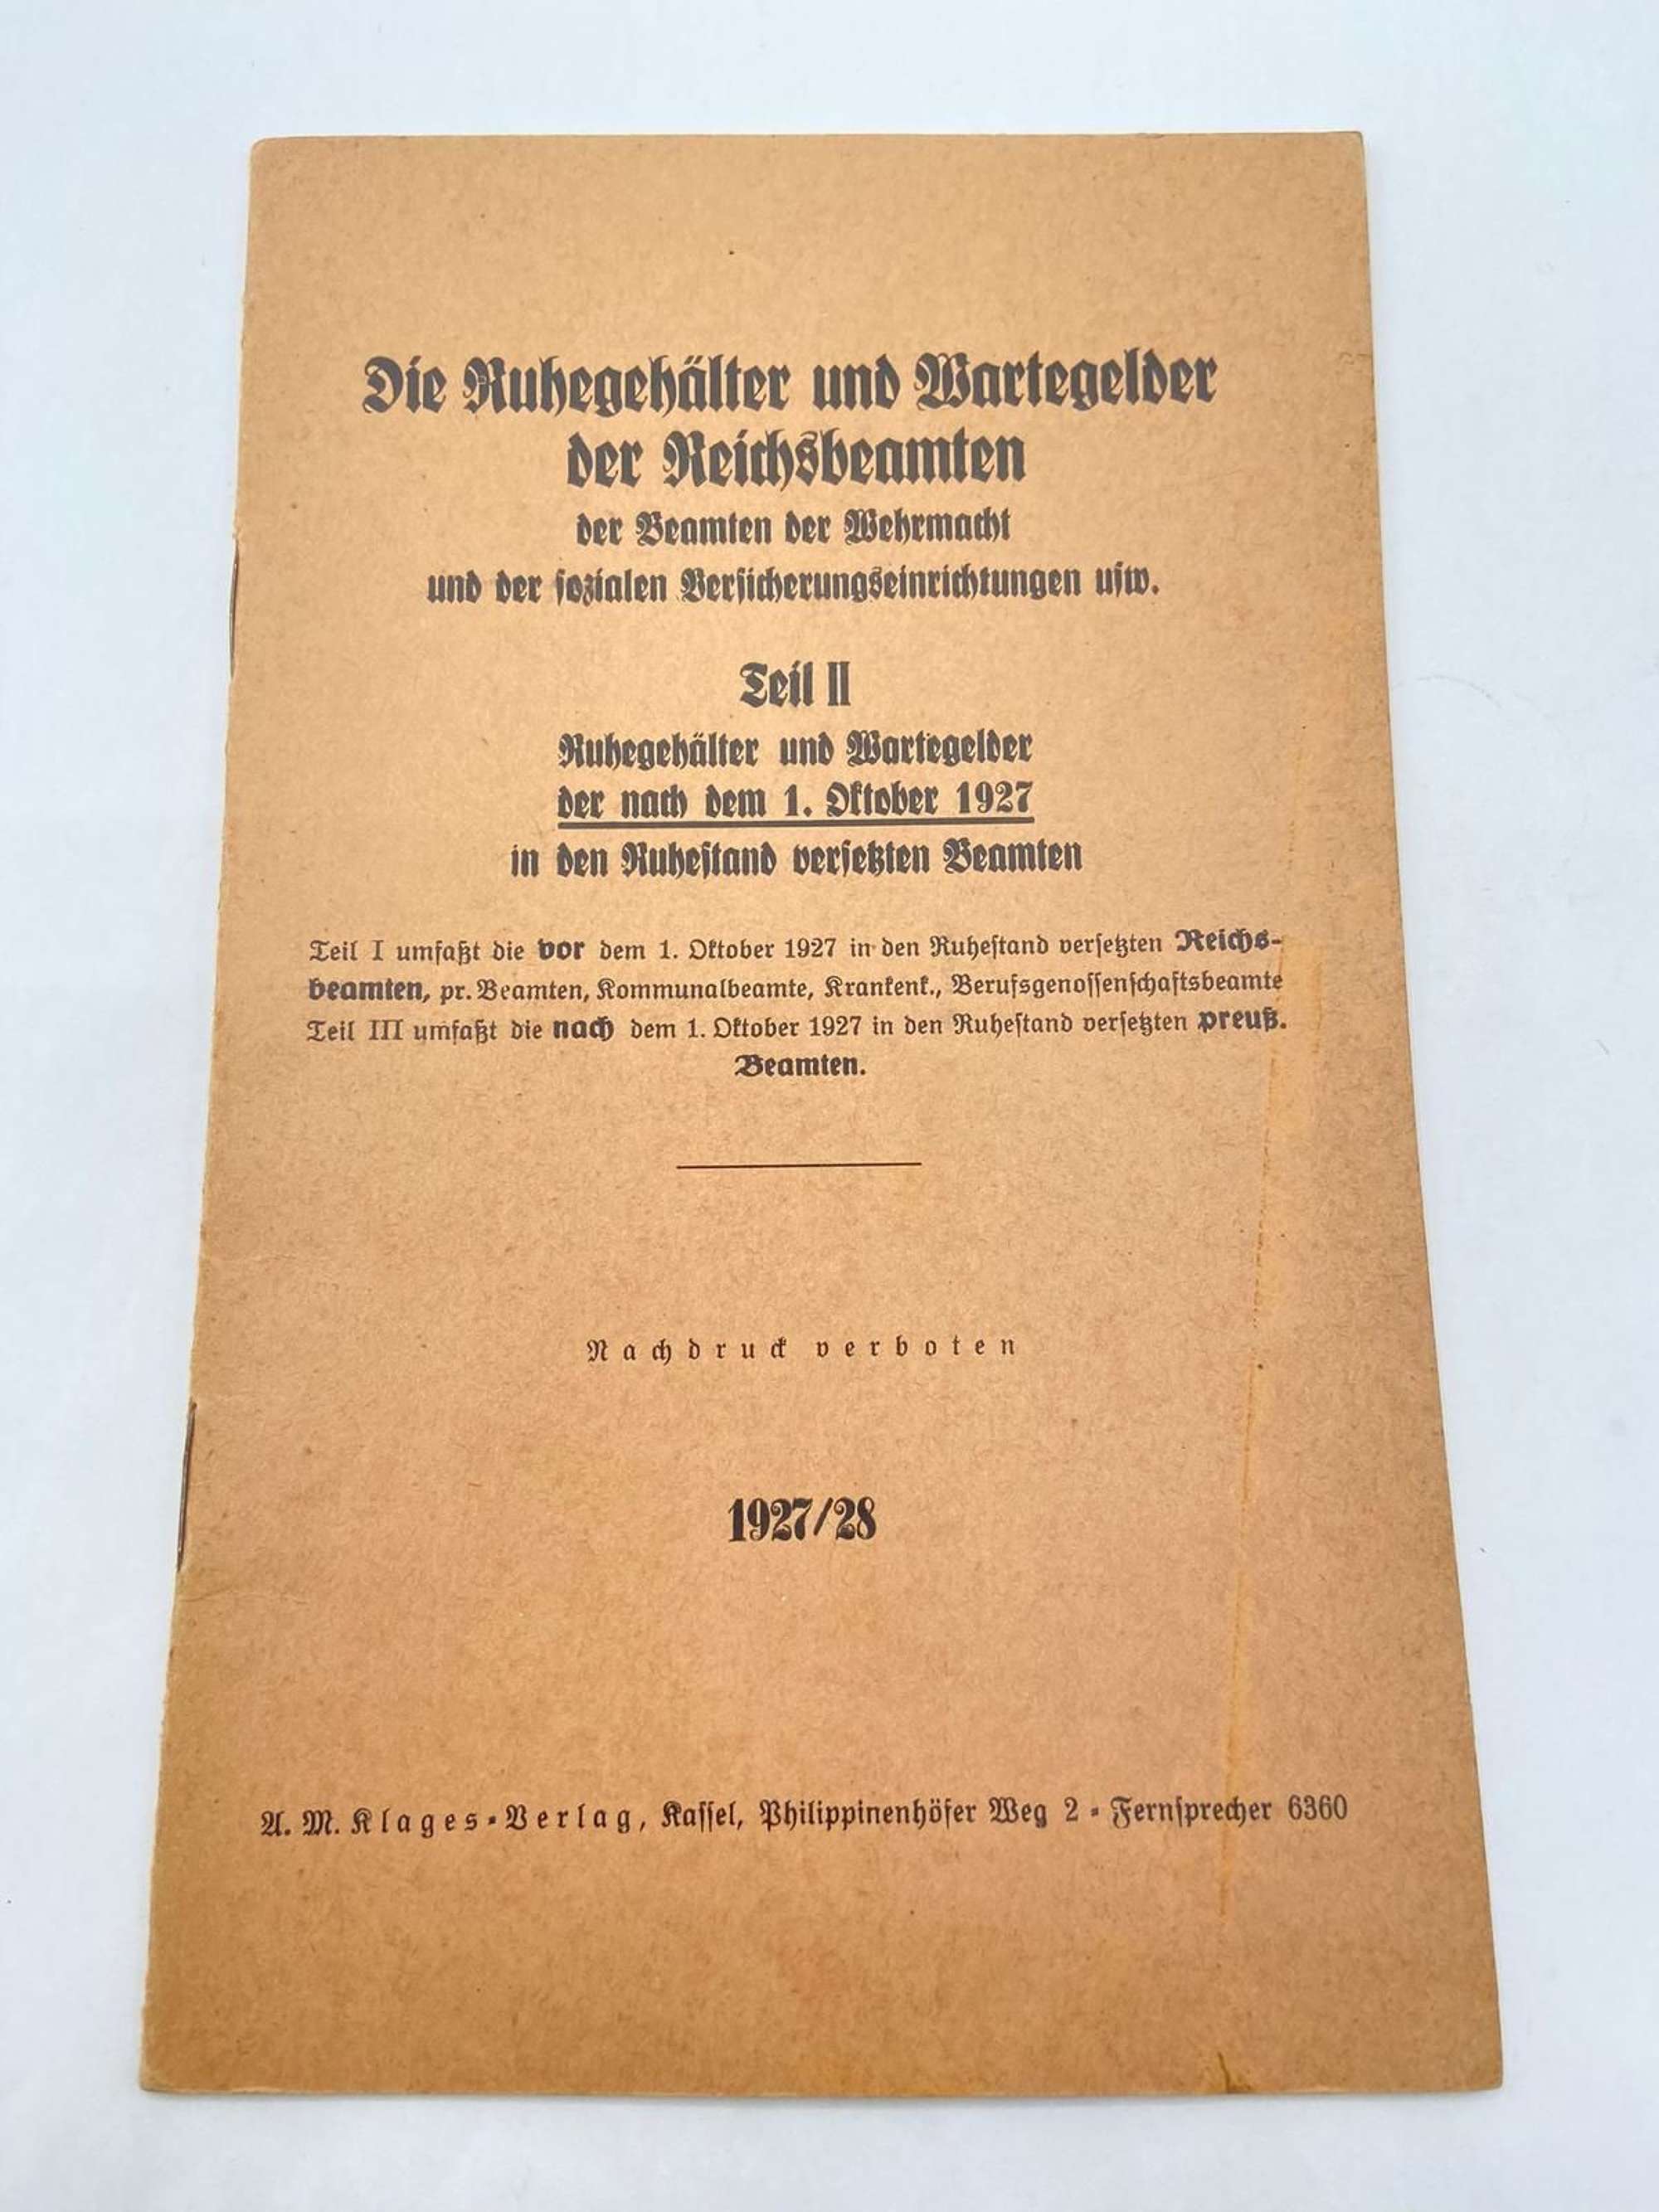 Pensions & Allowances Of Reich Officials & Wehrmacht 1927/28 booklet